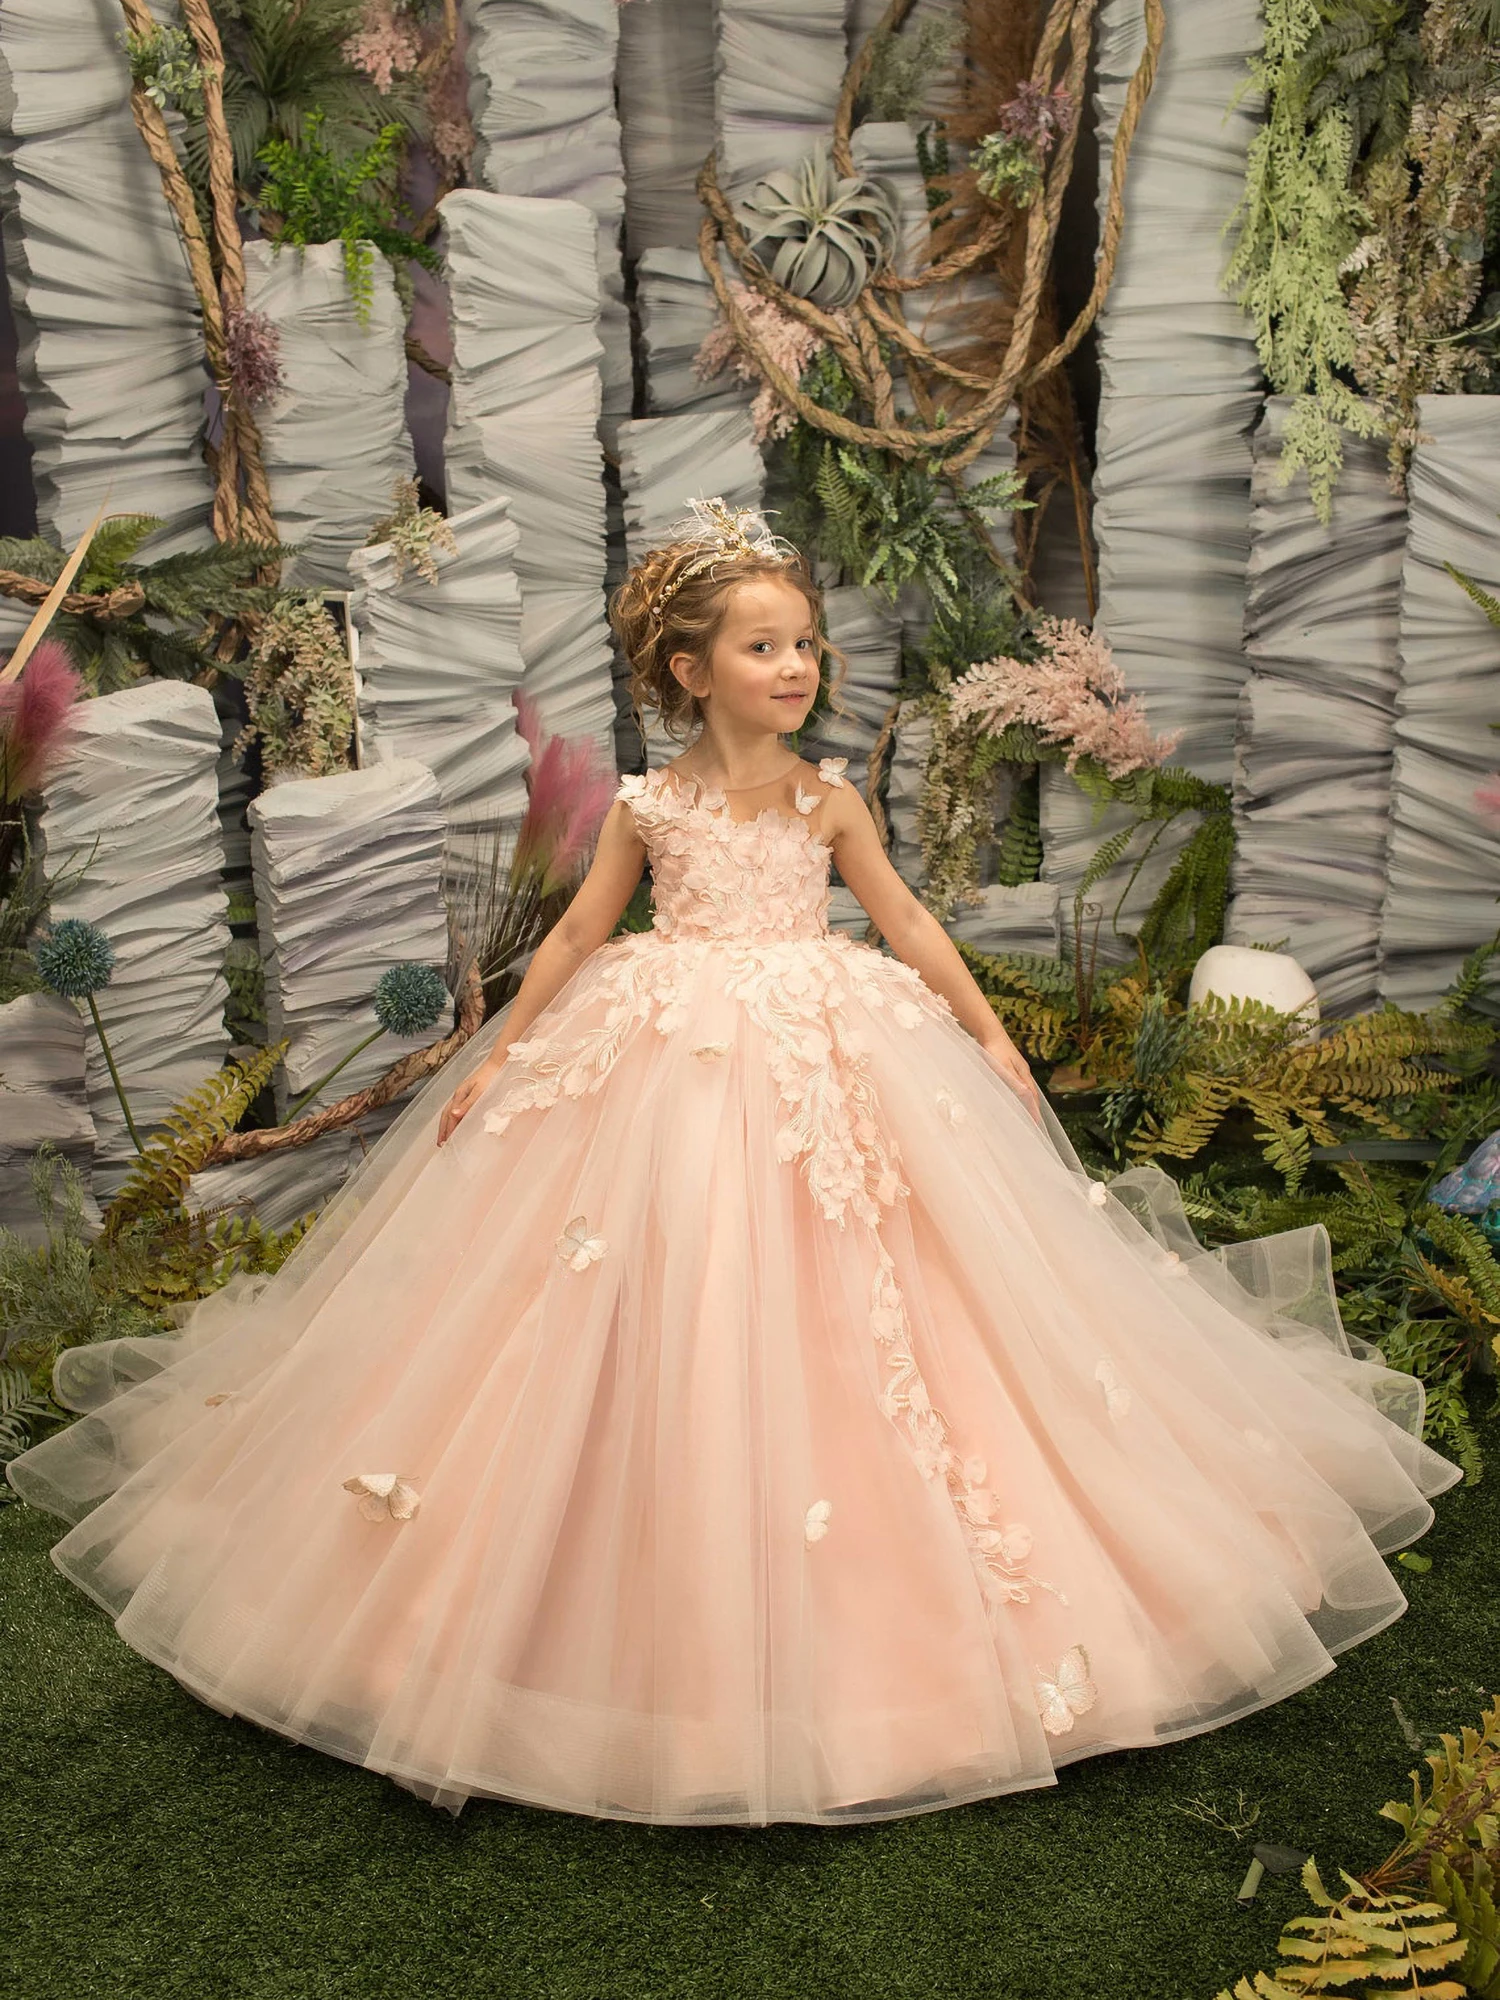 FATAPAESE 3D Floral Embroidery Child Bridesmaid Flower Girl Dress for Wedding Fluffy Ball Gown Kid Princess Evening Prom Party